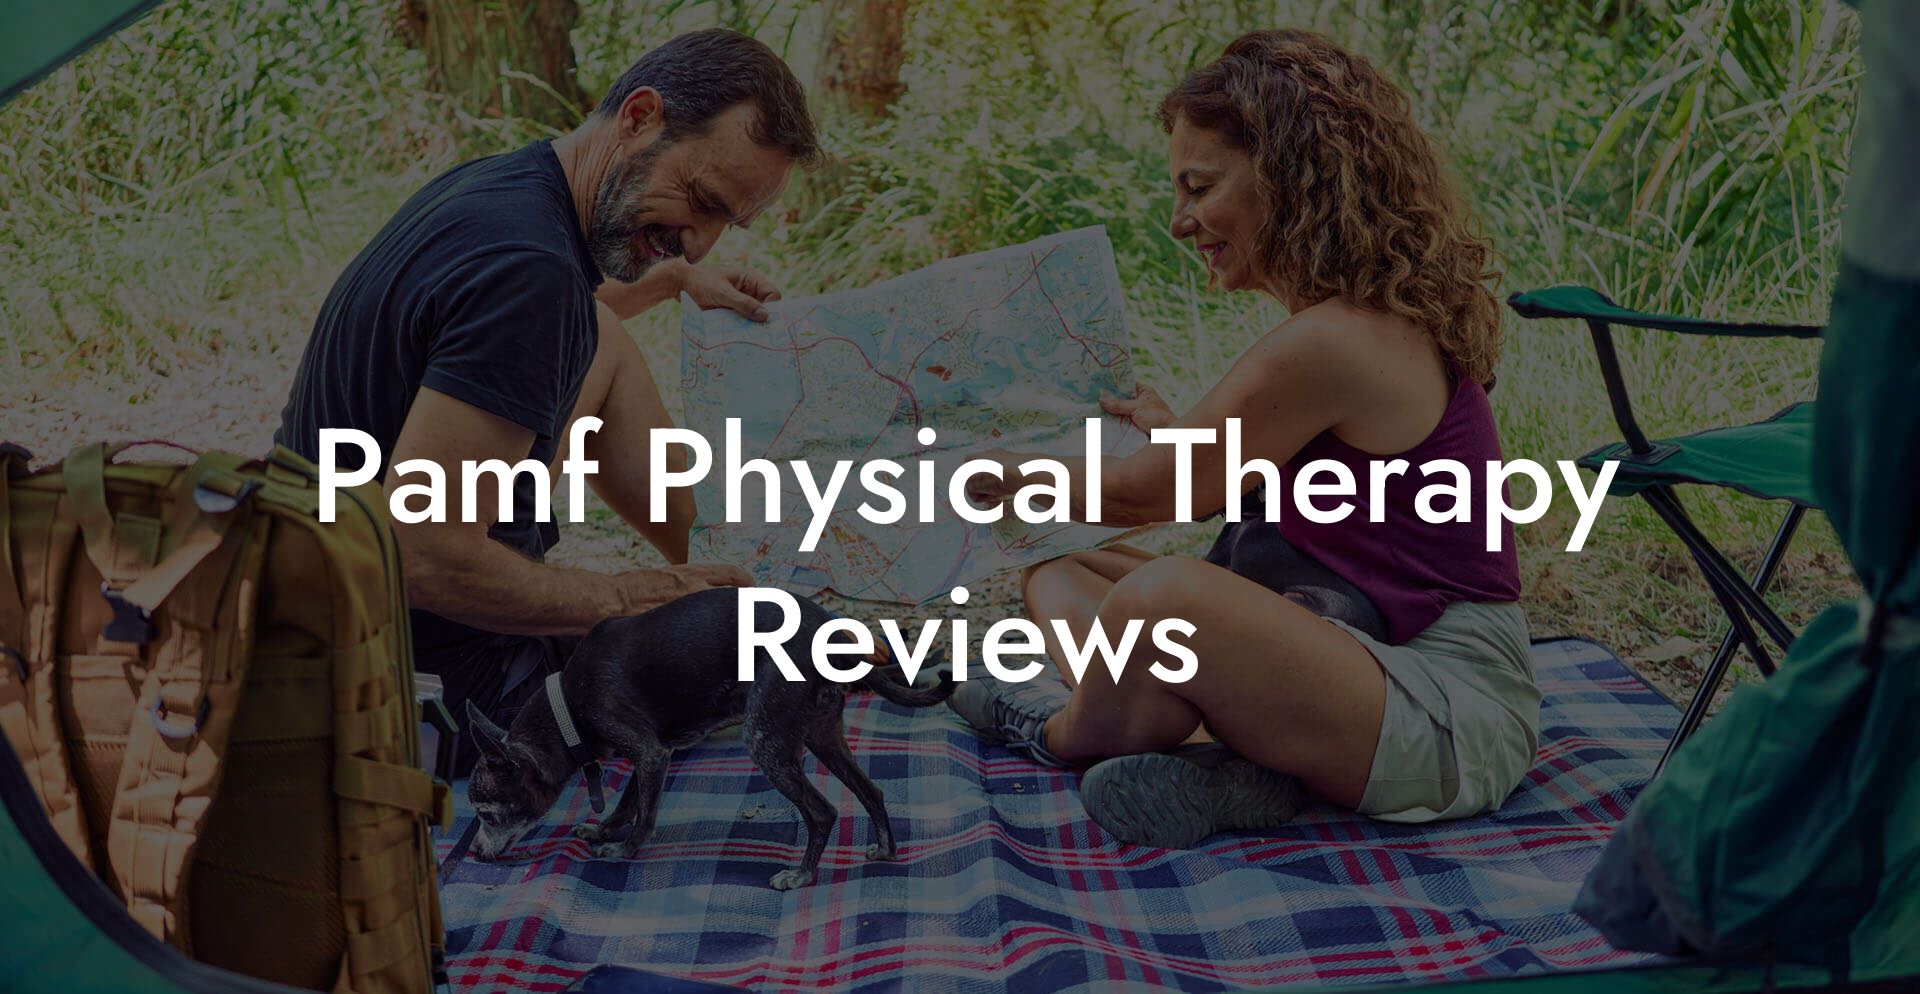 Pamf Physical Therapy Reviews